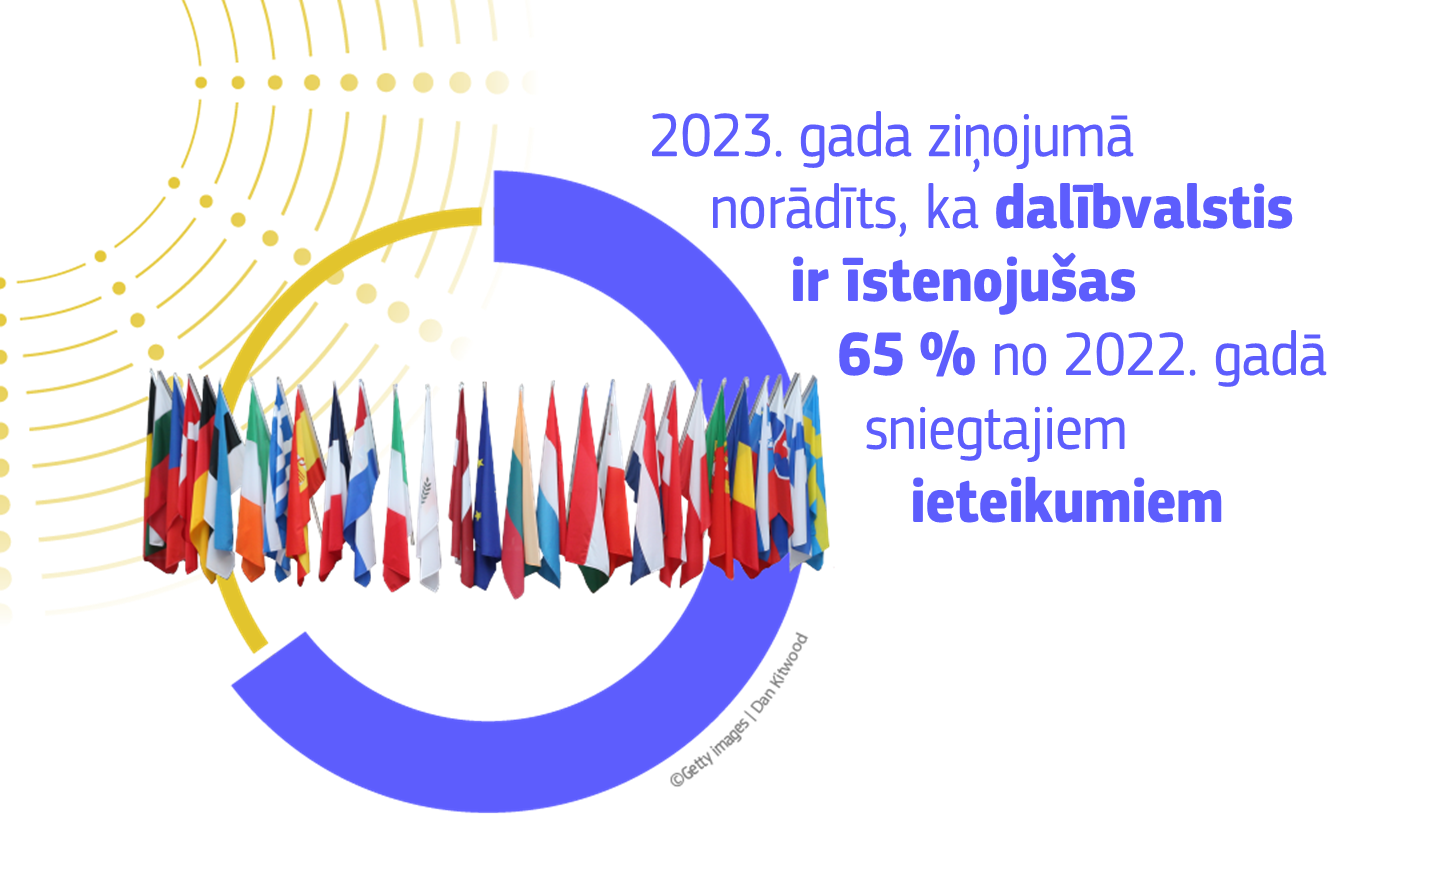 Infographic showing 65% of the 2022 recommendations were addressed by the Member States